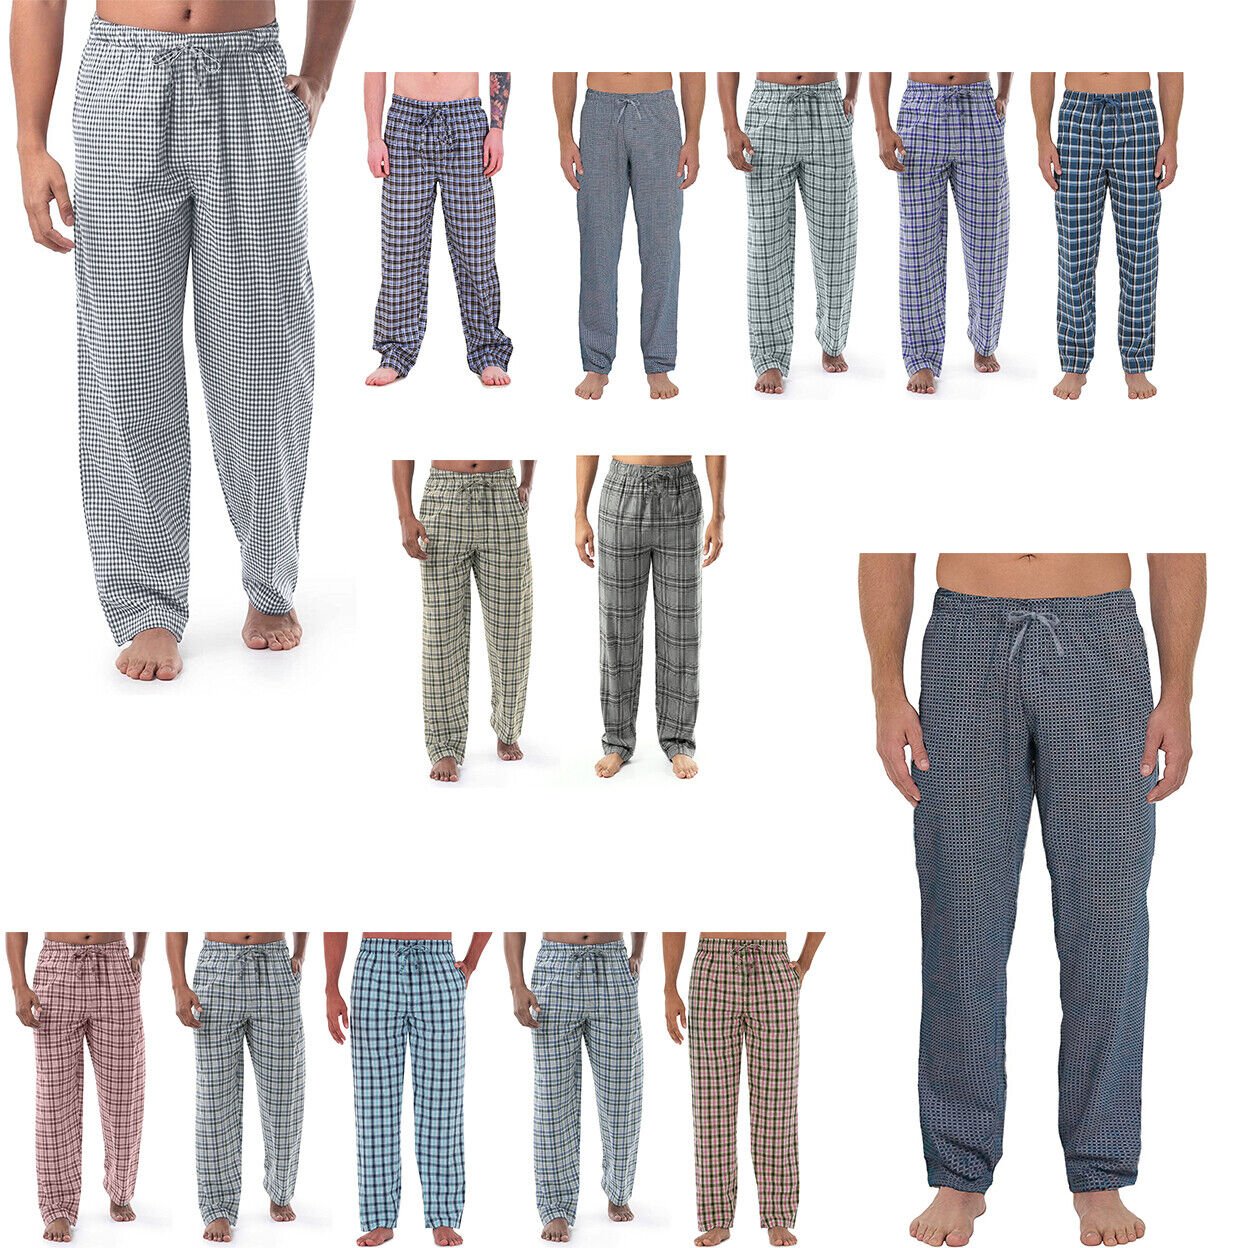 Multi-Pack: Men's Ultra-Soft Solid & Plaid Cotton Jersey Knit Comfy Sleep Lounge Pajama Pants - 1-pack Solid, X-large